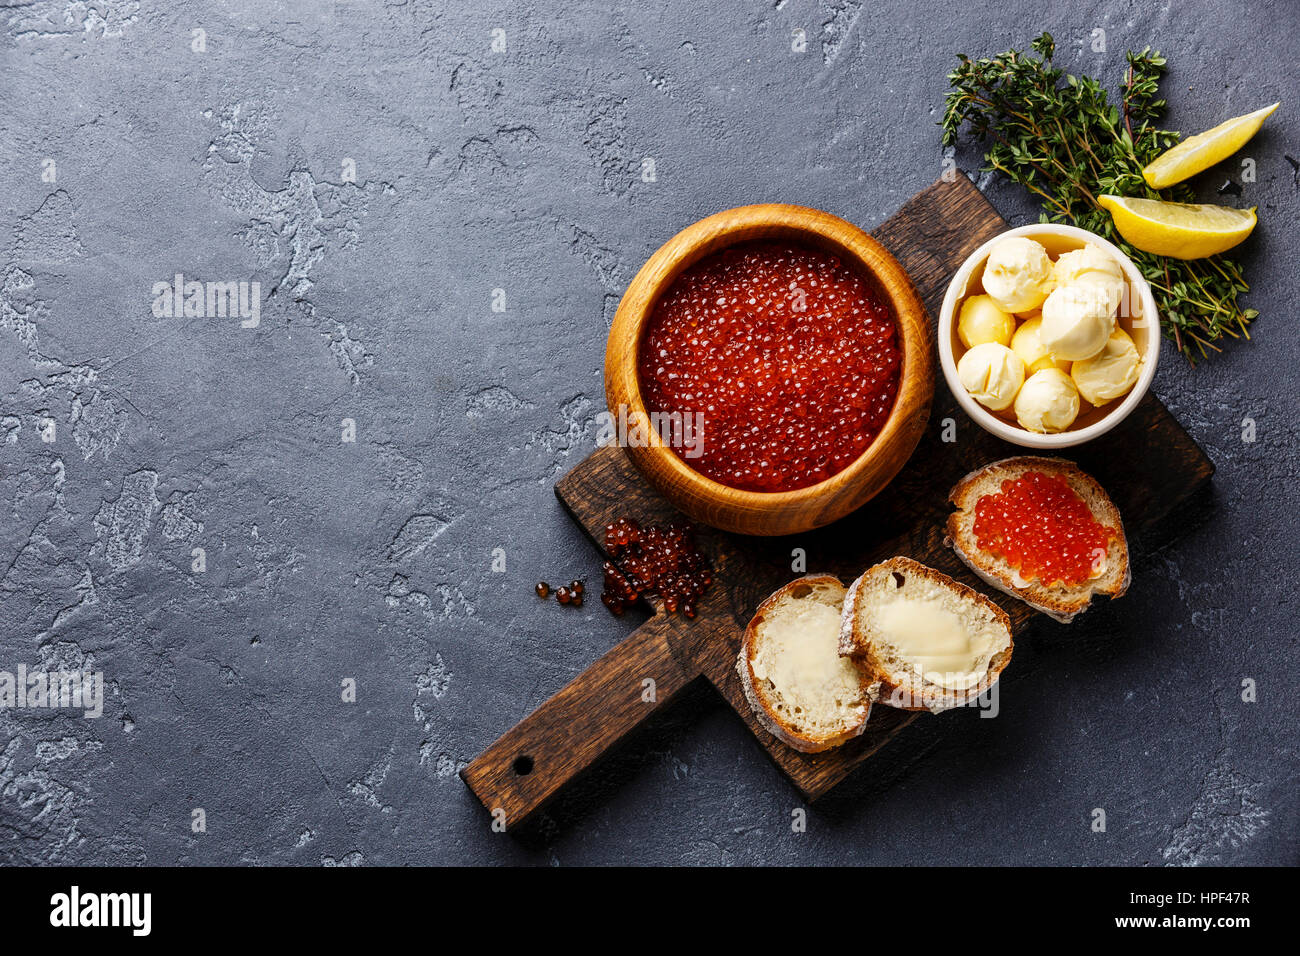 Salmon red caviar in wooden bowl and Sandwiches on dark stone background copy space Stock Photo